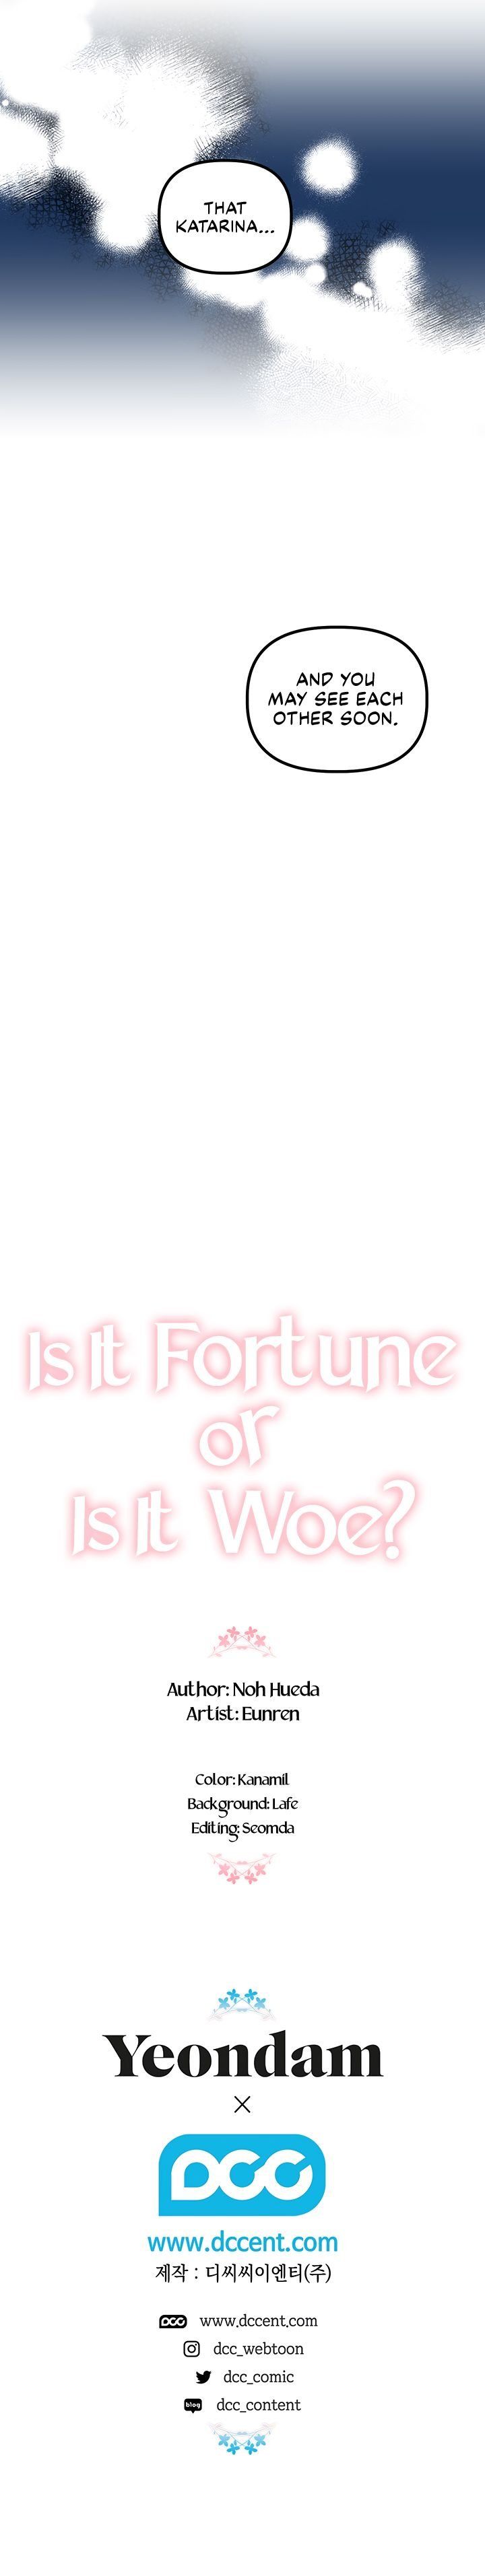 Is It a Fortune or Is It a Woe? Chapter 26 page 16